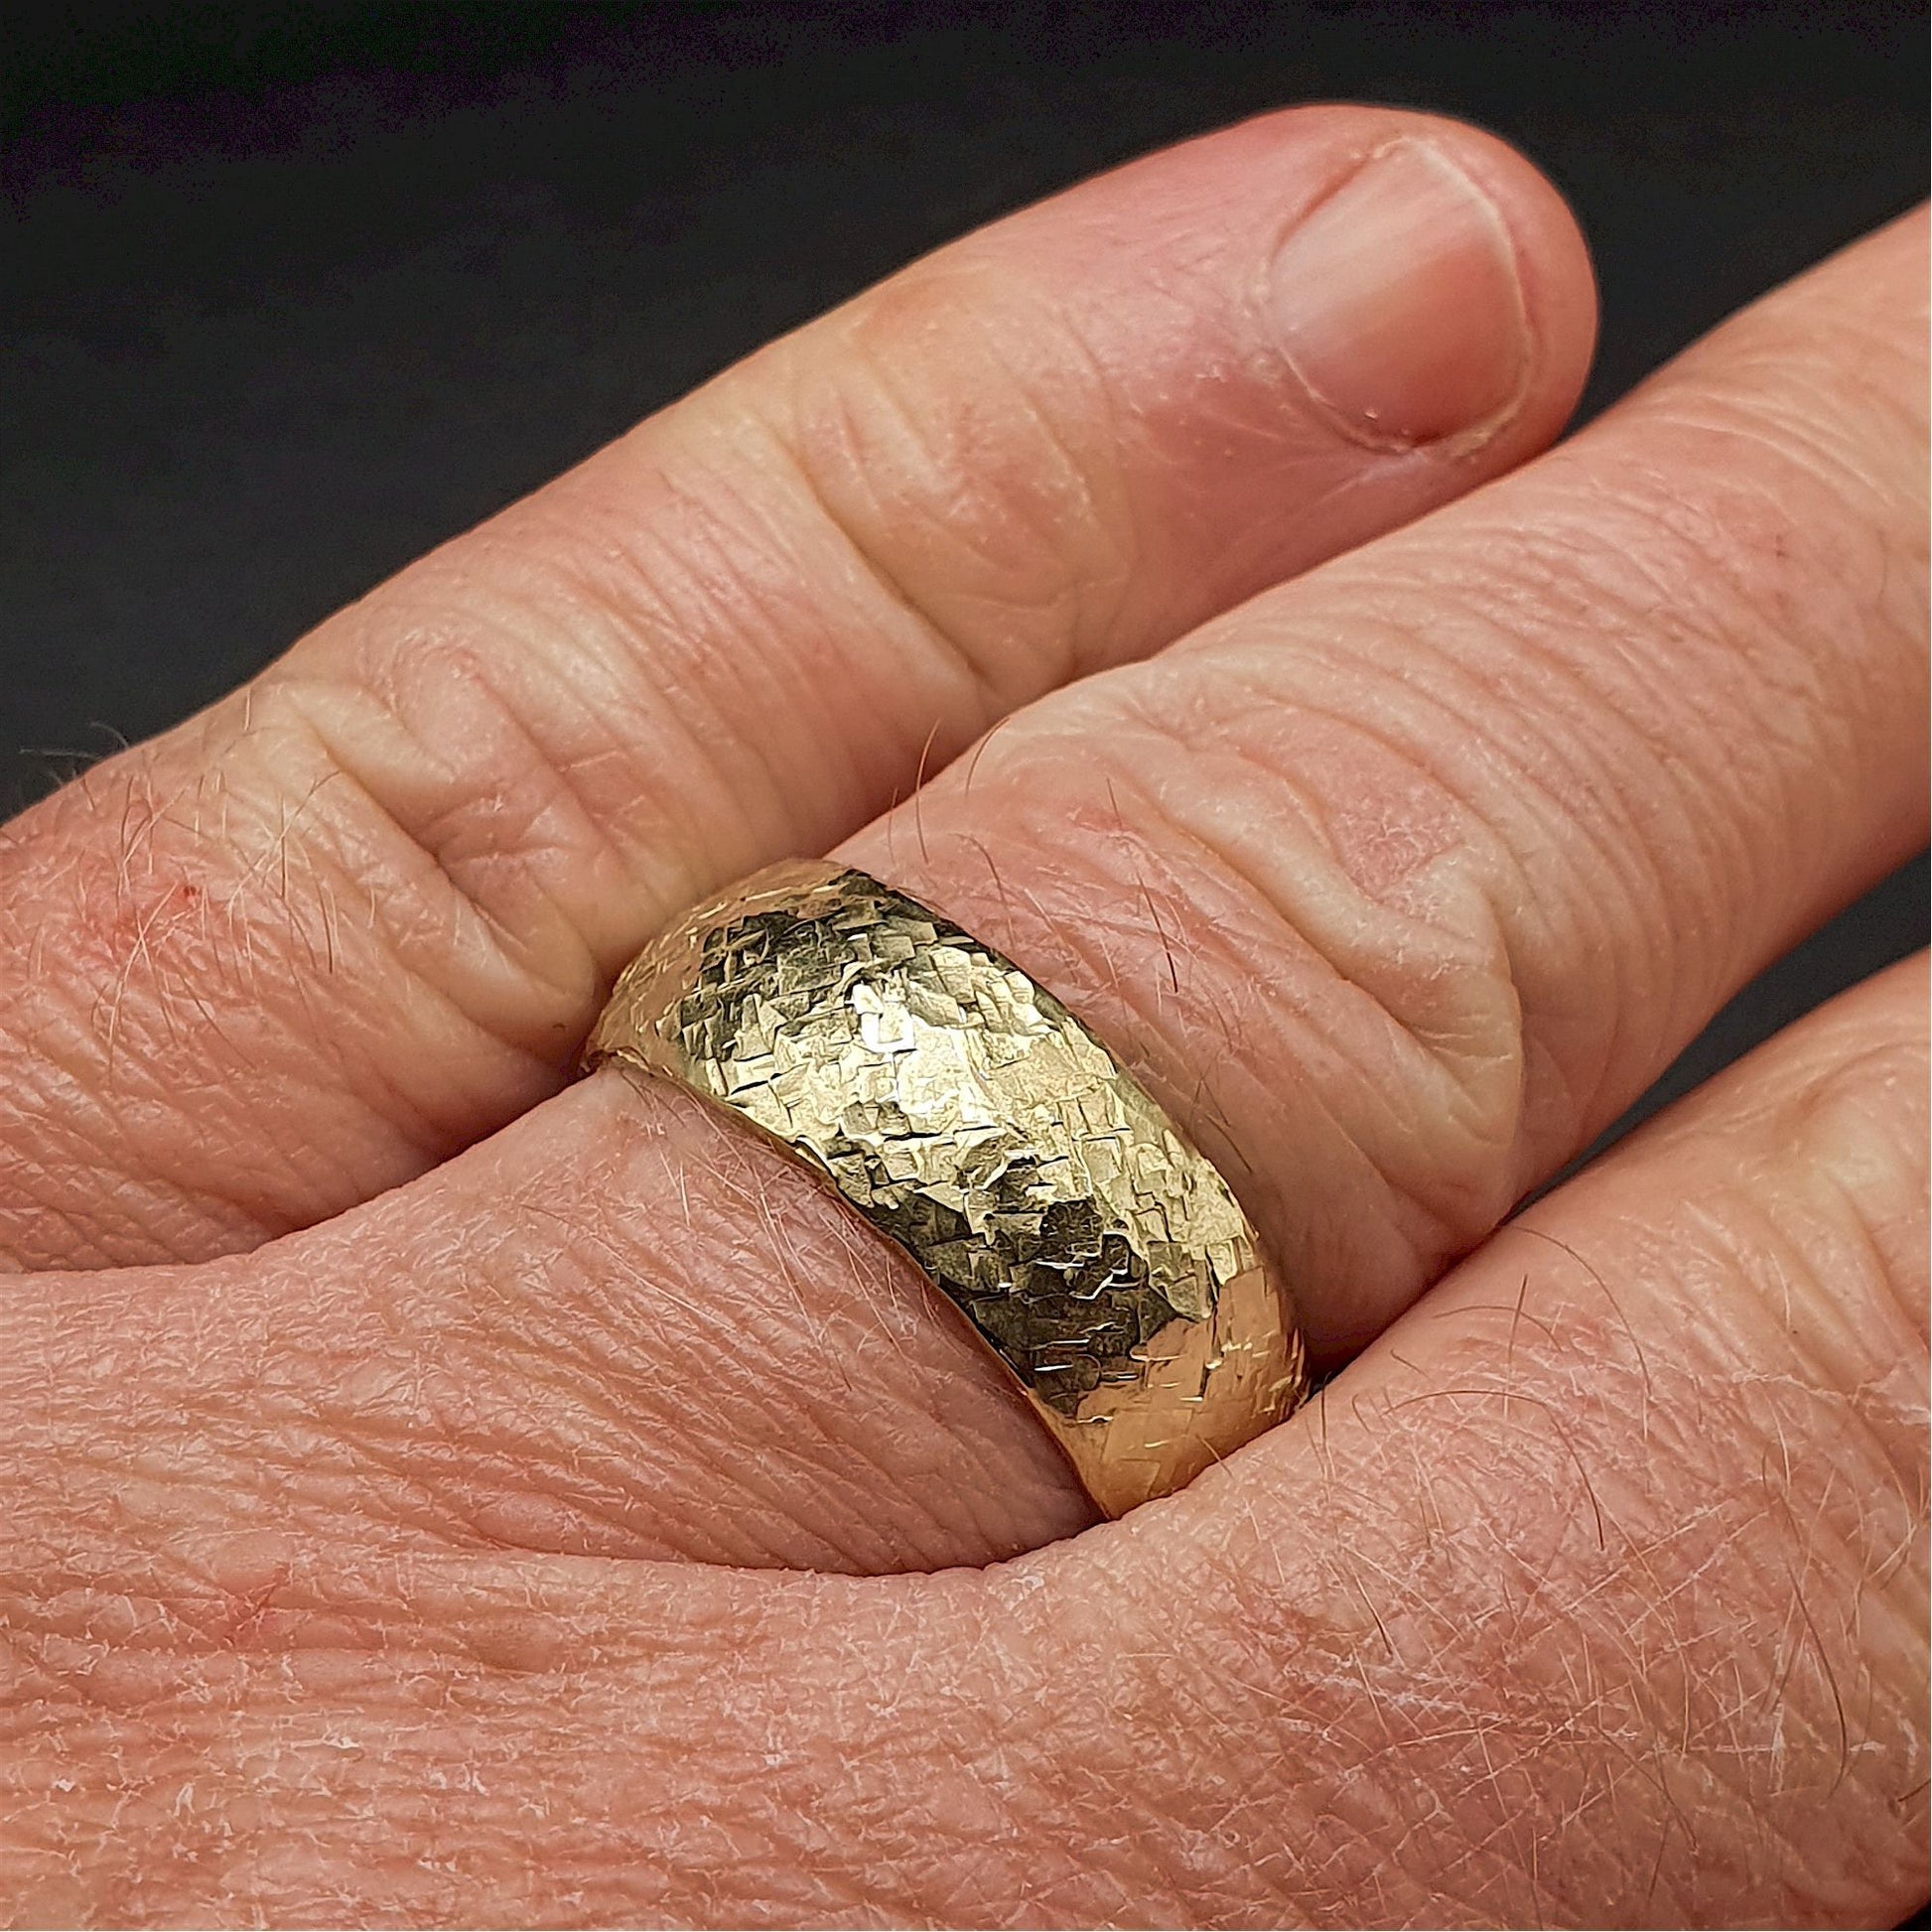 Wedding ring, broad yellow gold Fire hammered design - Cumbrian Designs